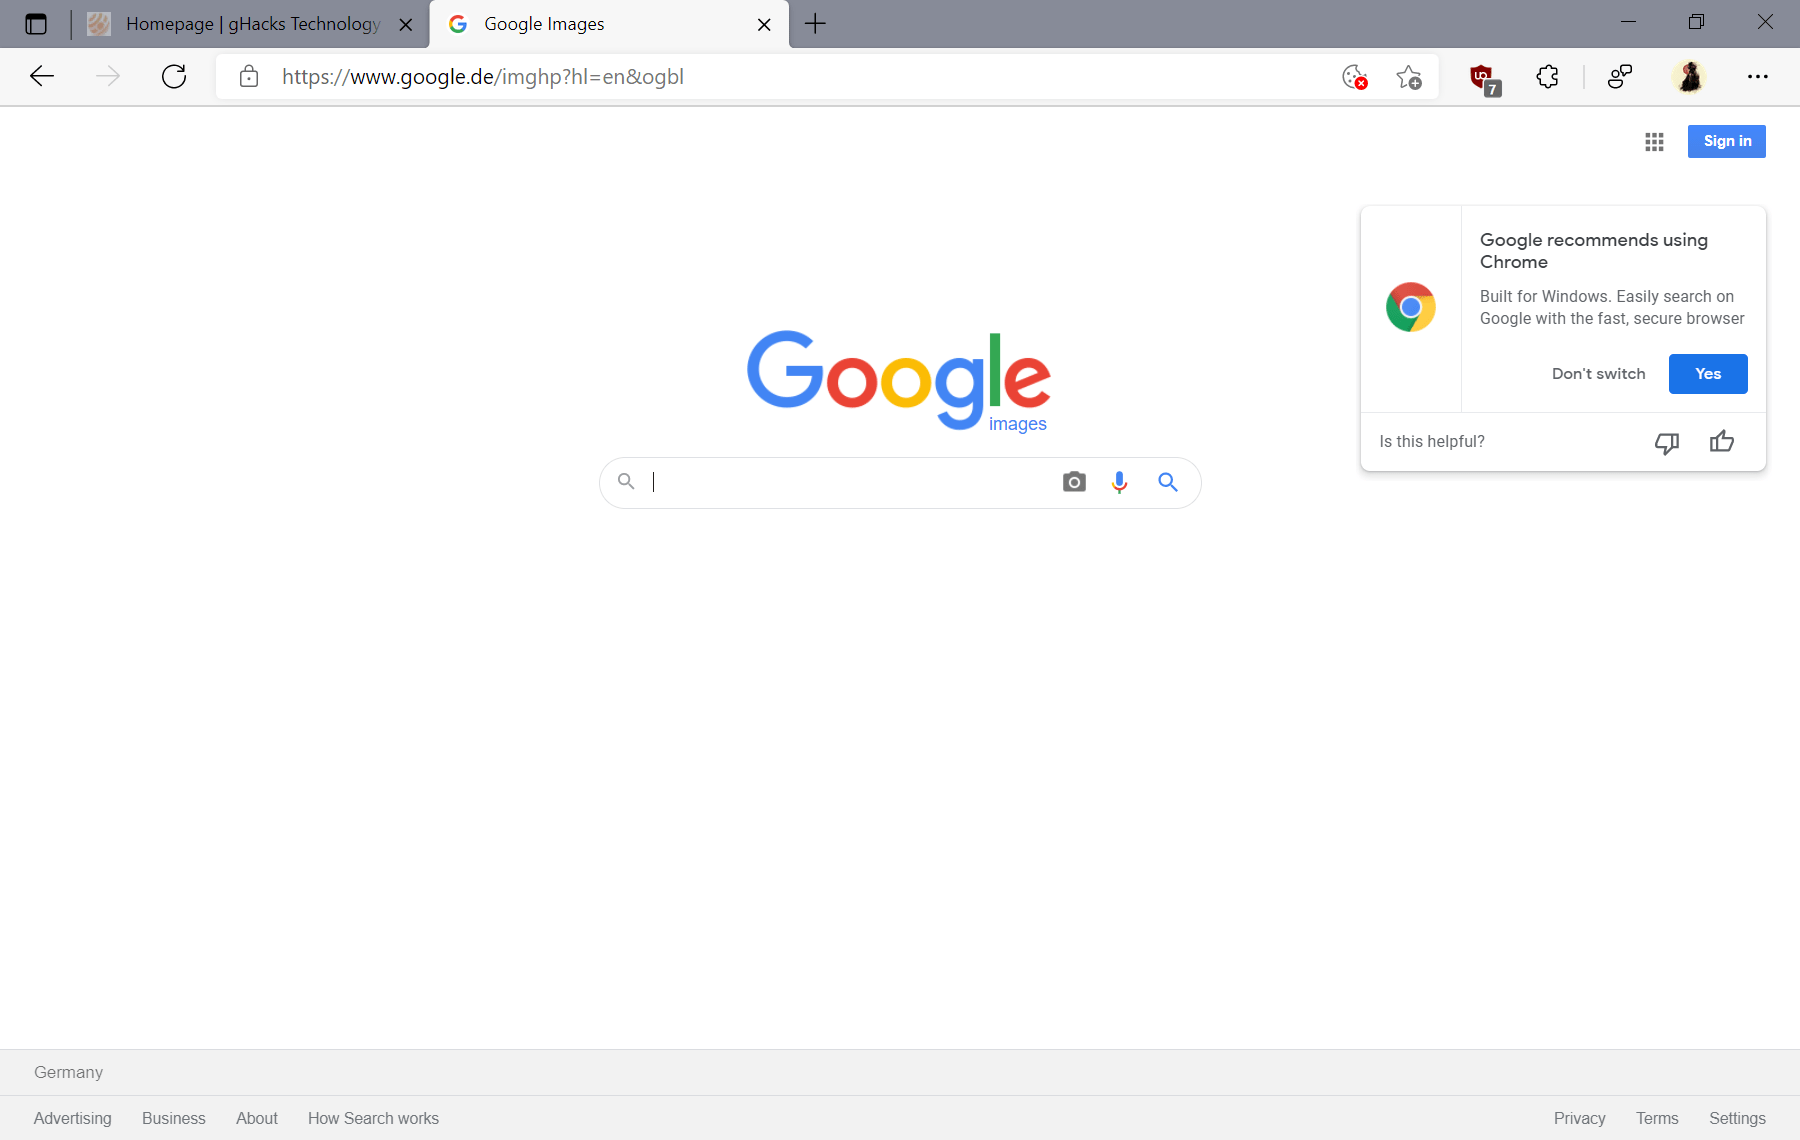 google recommends using chrome